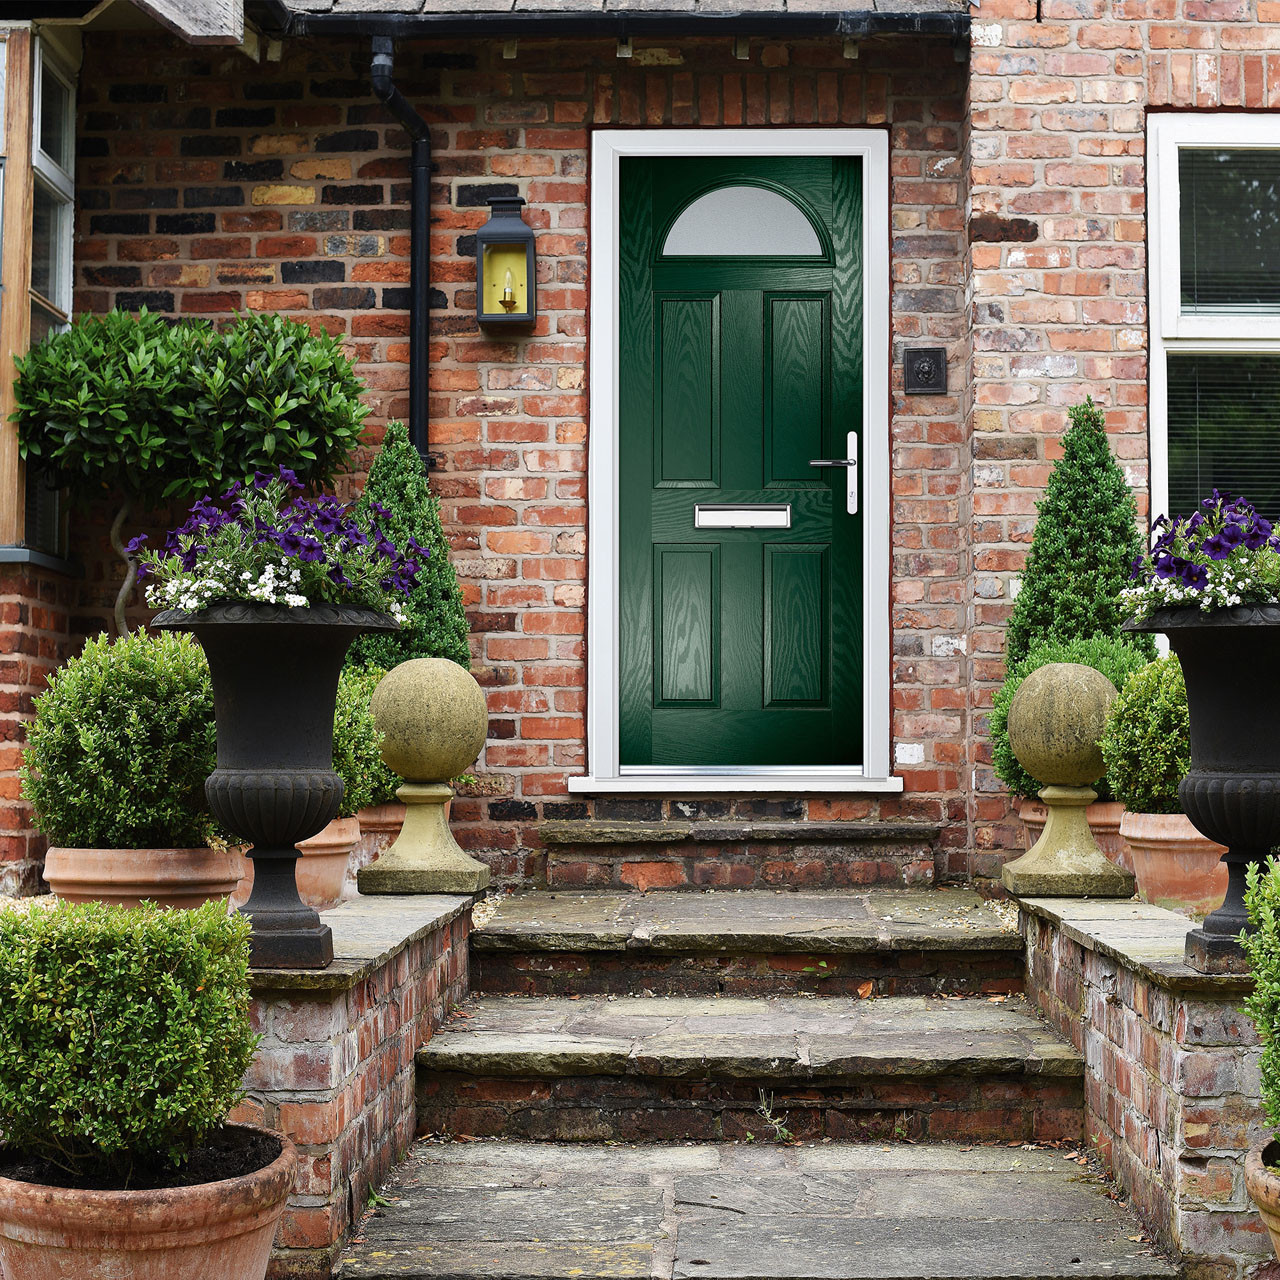 Front view of brick house with green door, flower pots with flowers